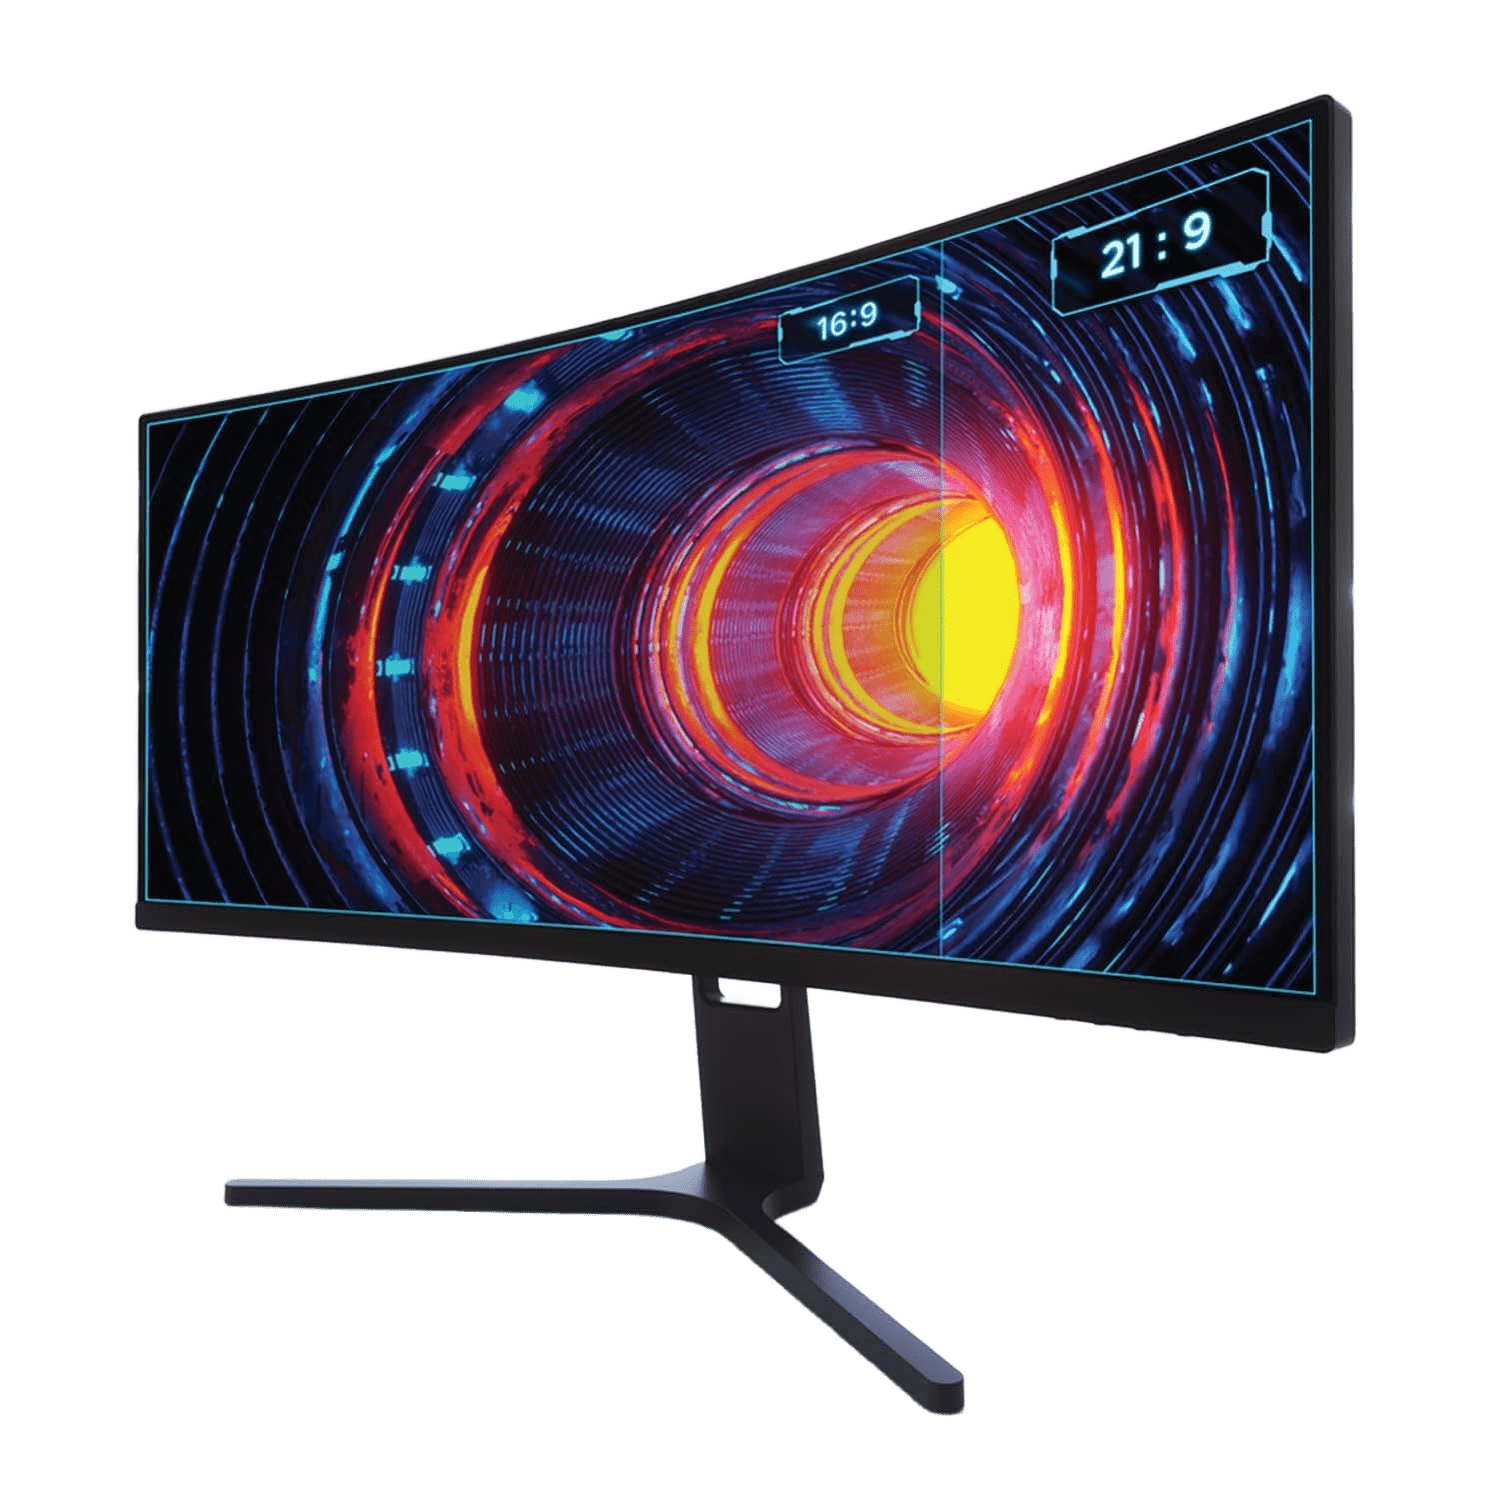 Xiaomi Curved Gaming Monitor 30 Inch 200Hz 2560x1080 WFHD Curved Display - Black